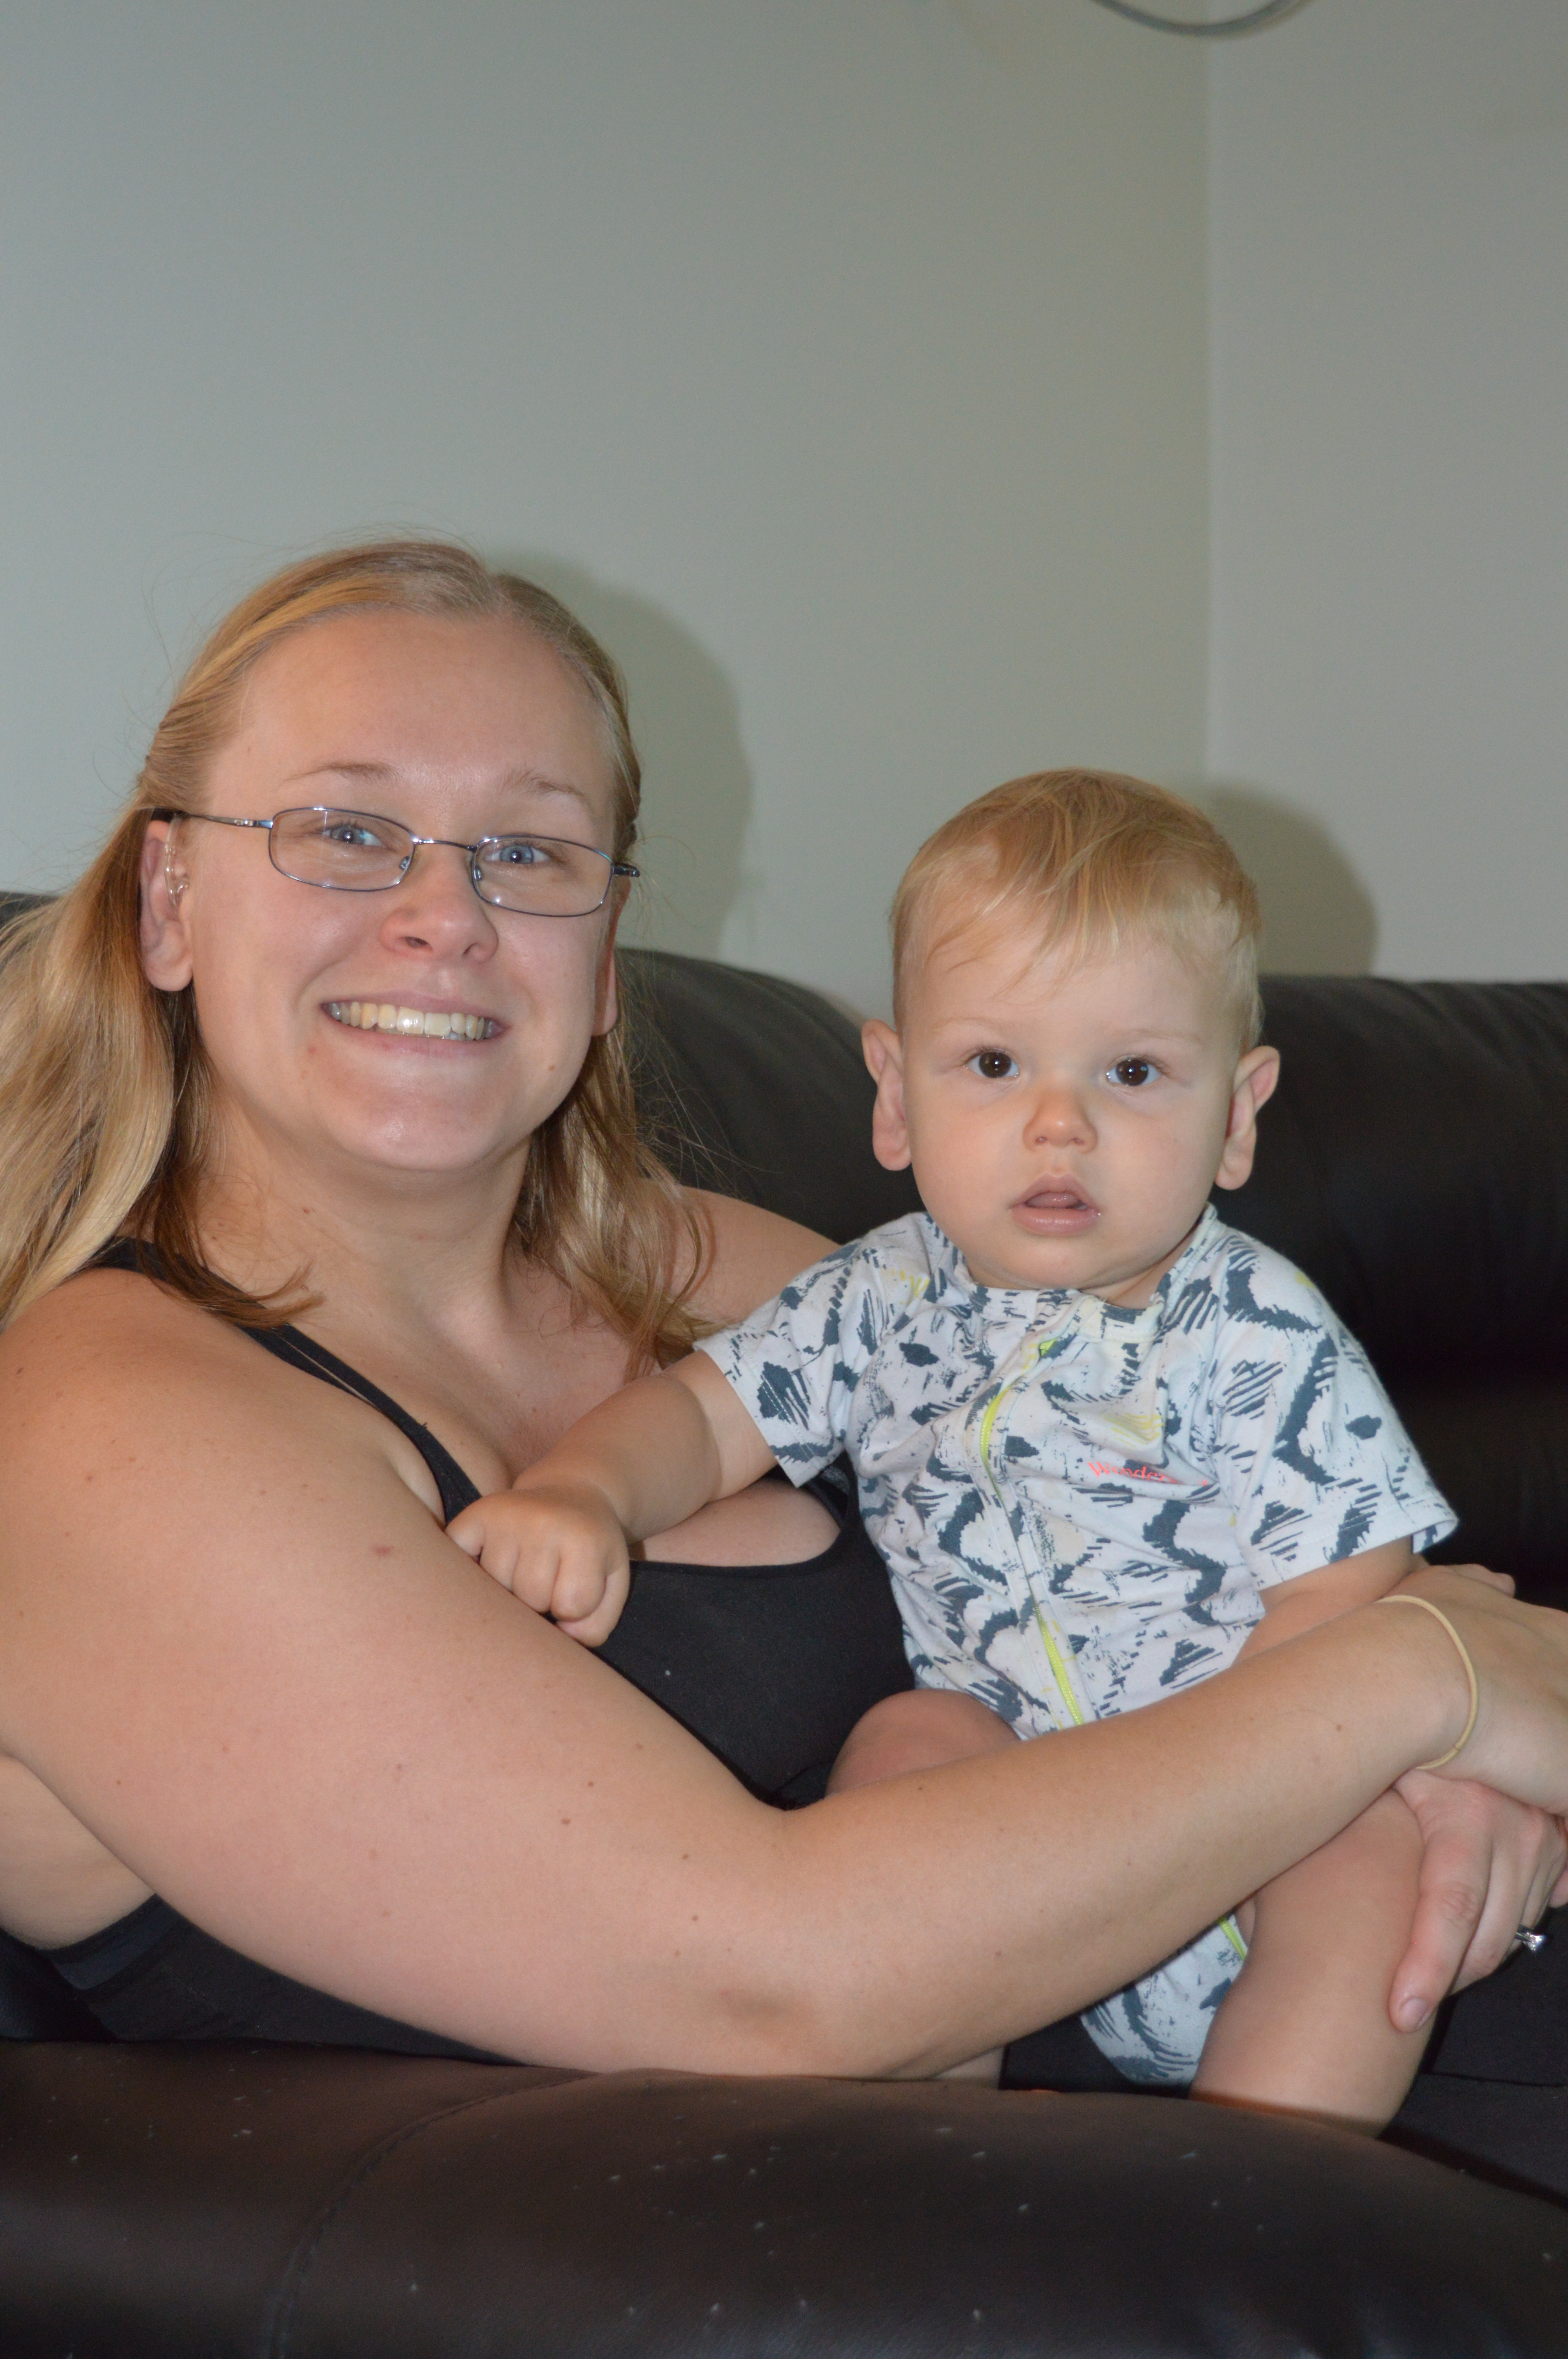 Medowie resident Stevie Wilkinson with son George, 11 months, shares her experiences.